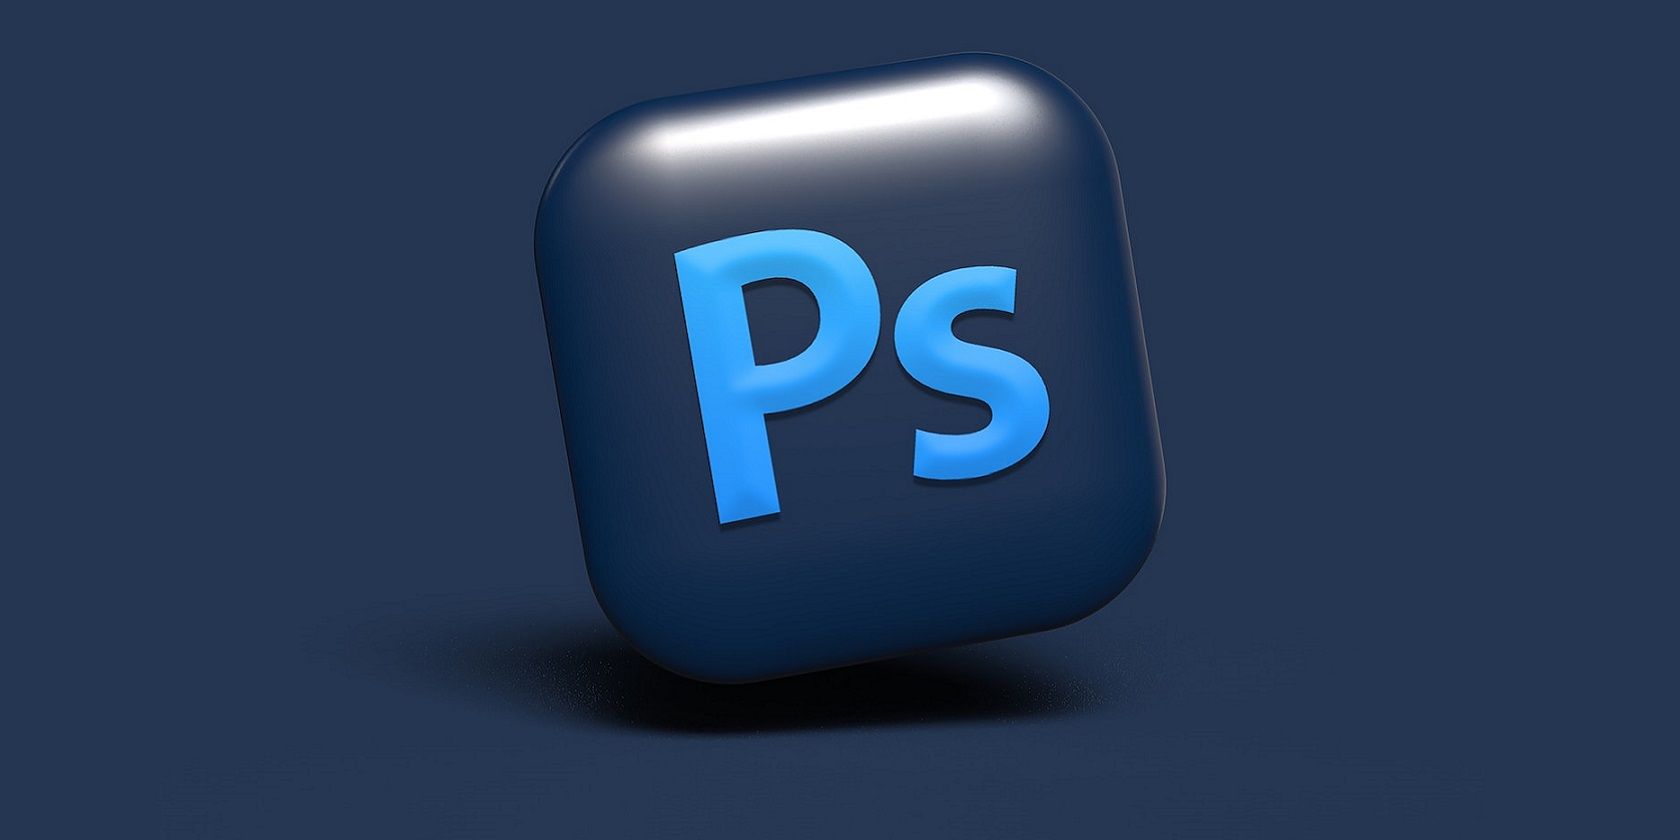 The Photoshop logo in illustration form